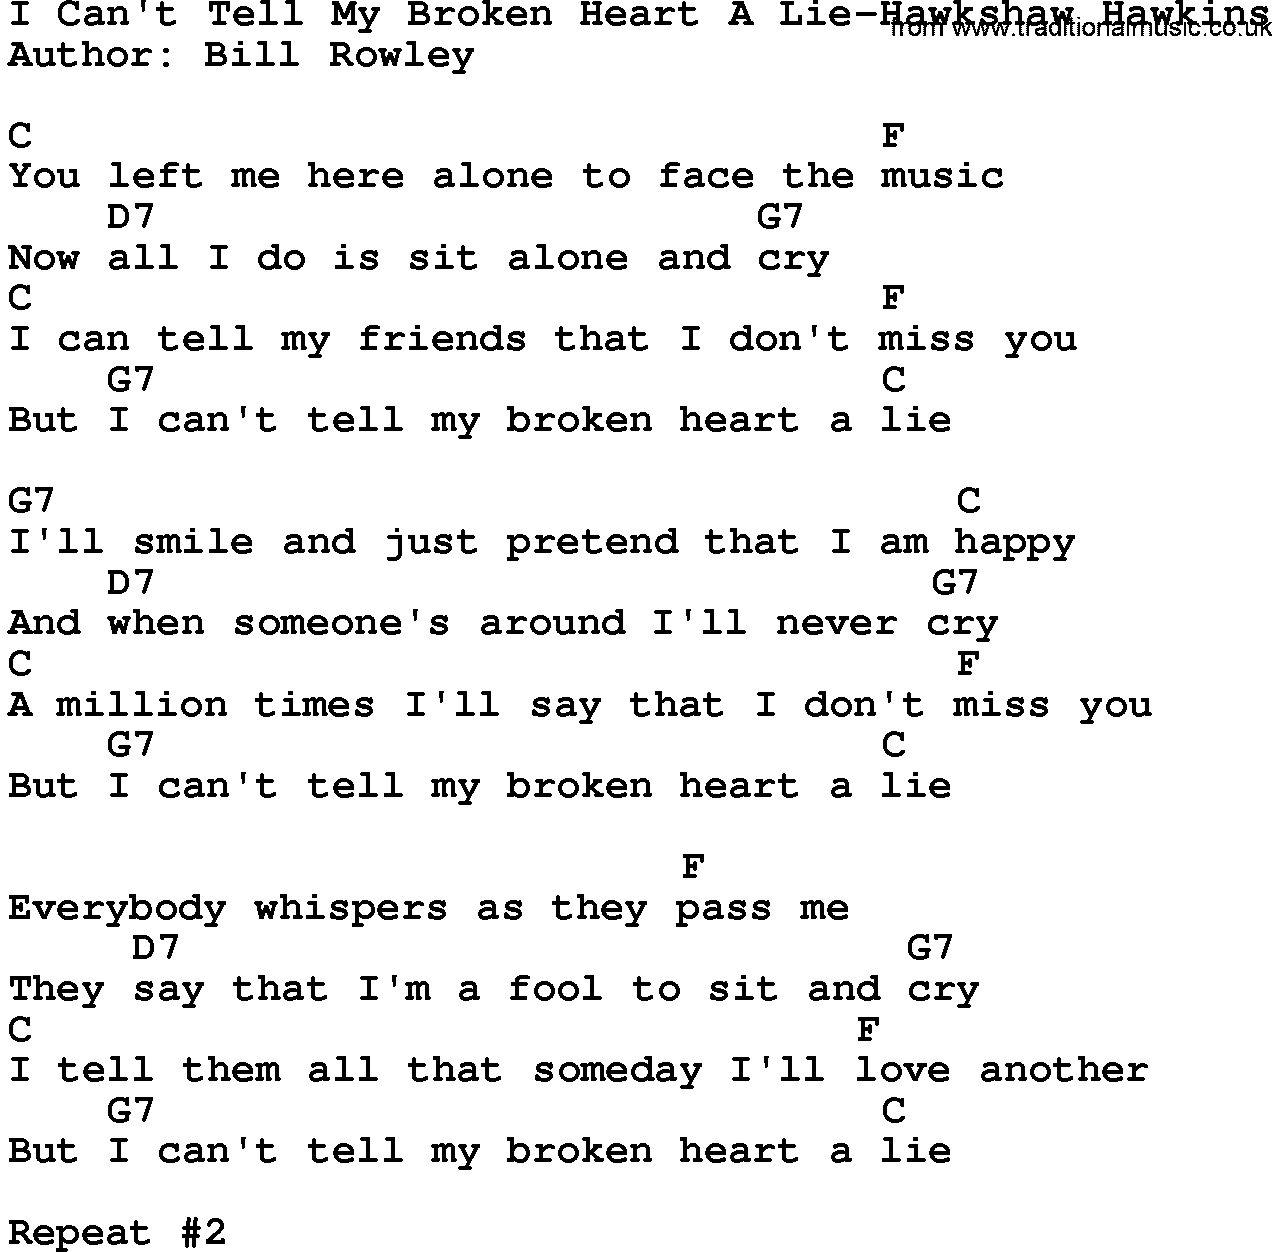 Country music song: I Can't Tell My Broken Heart A Lie-Hawkshaw Hawkins lyrics and chords